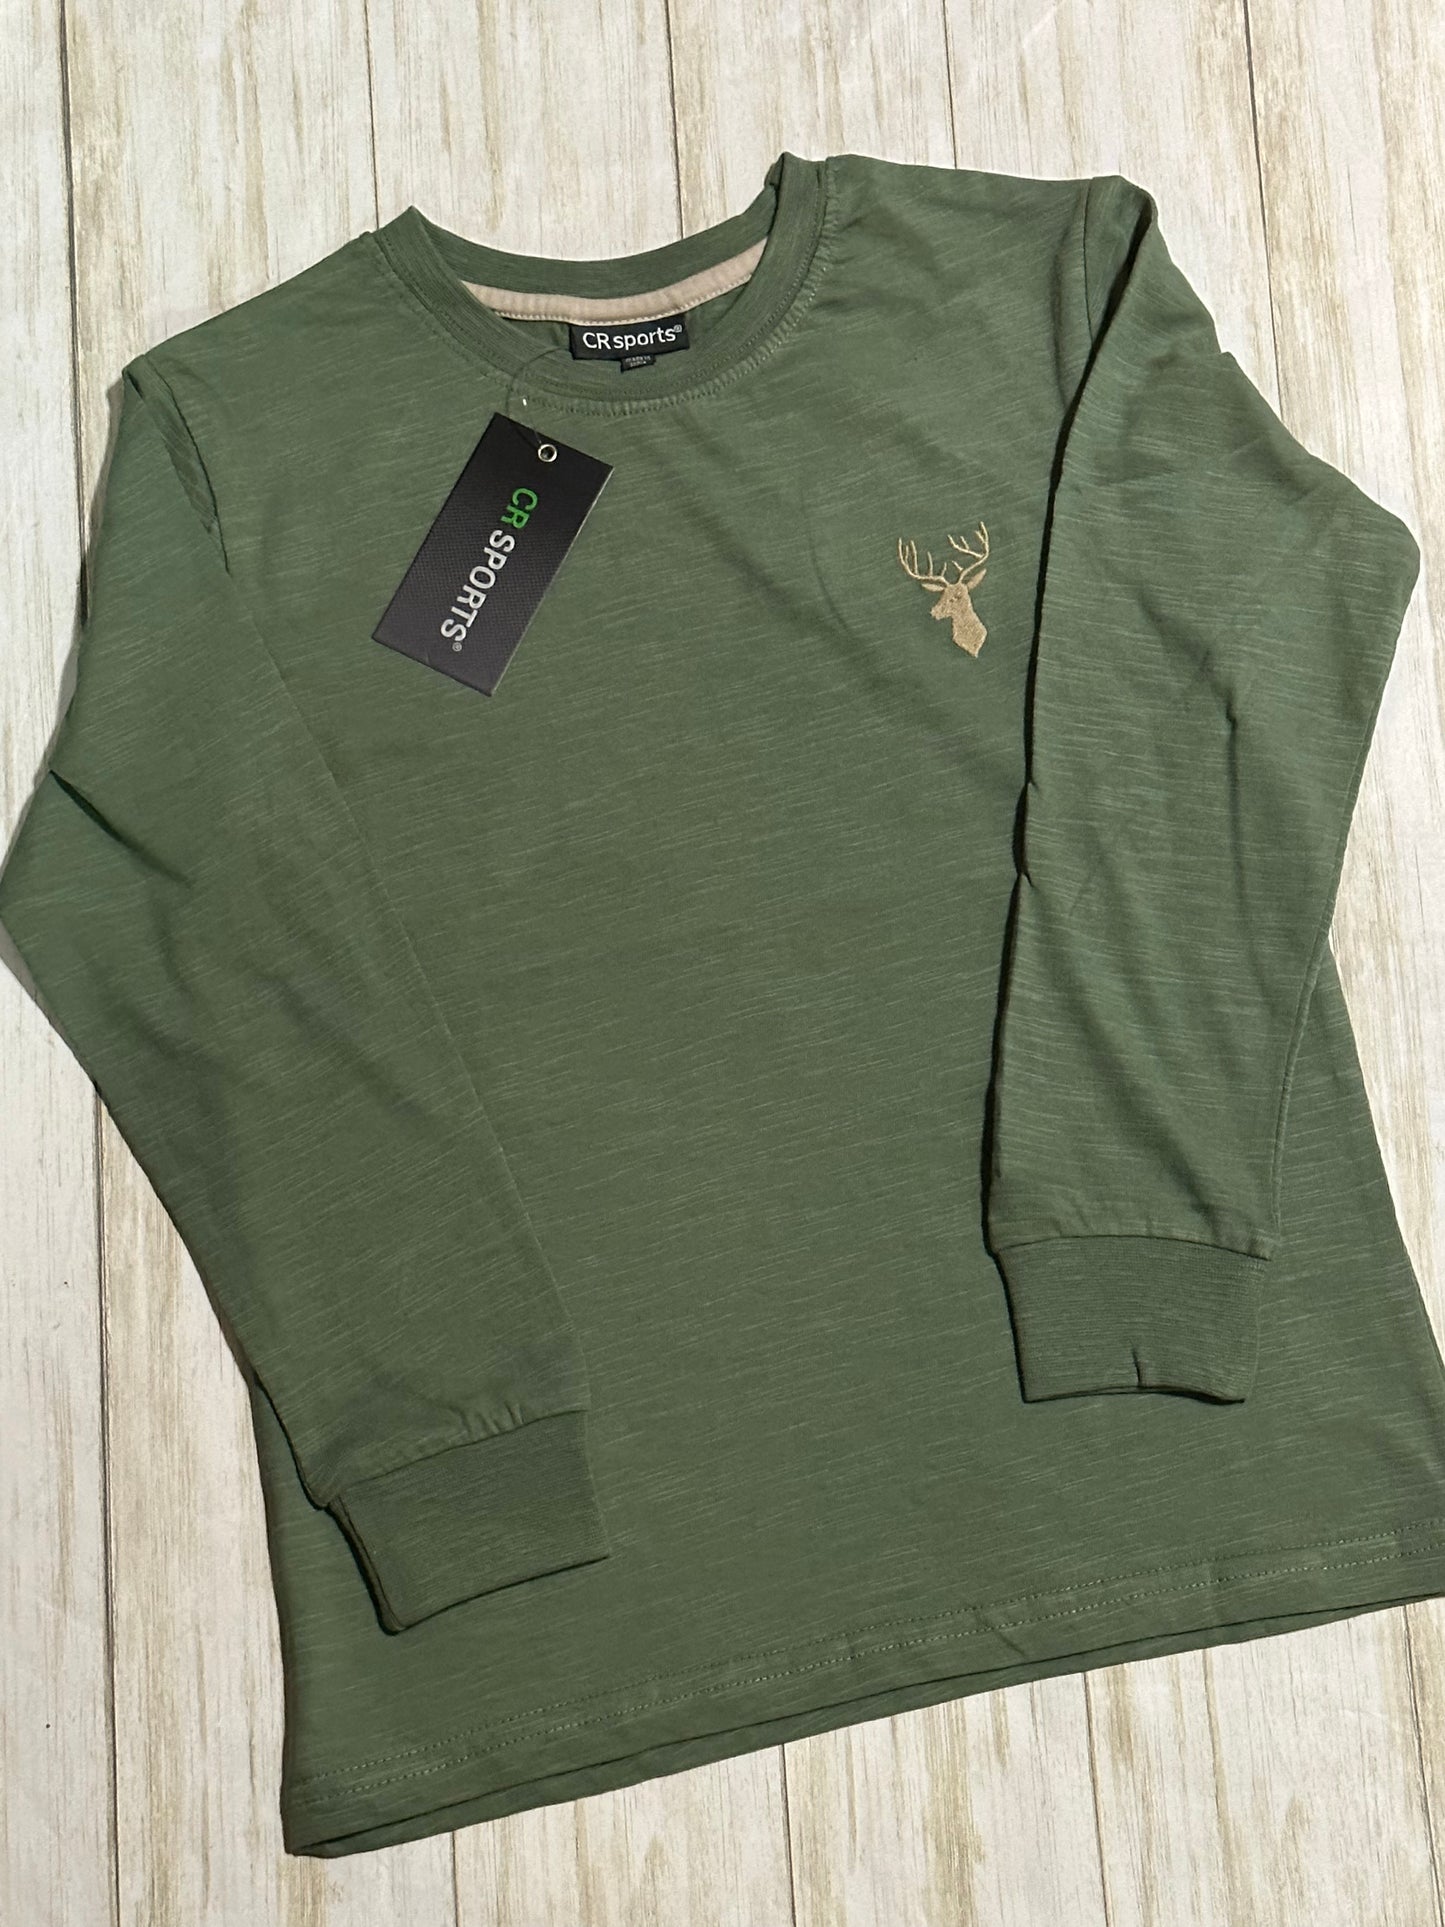 Forest Deer Shirt L/S by CR Sports